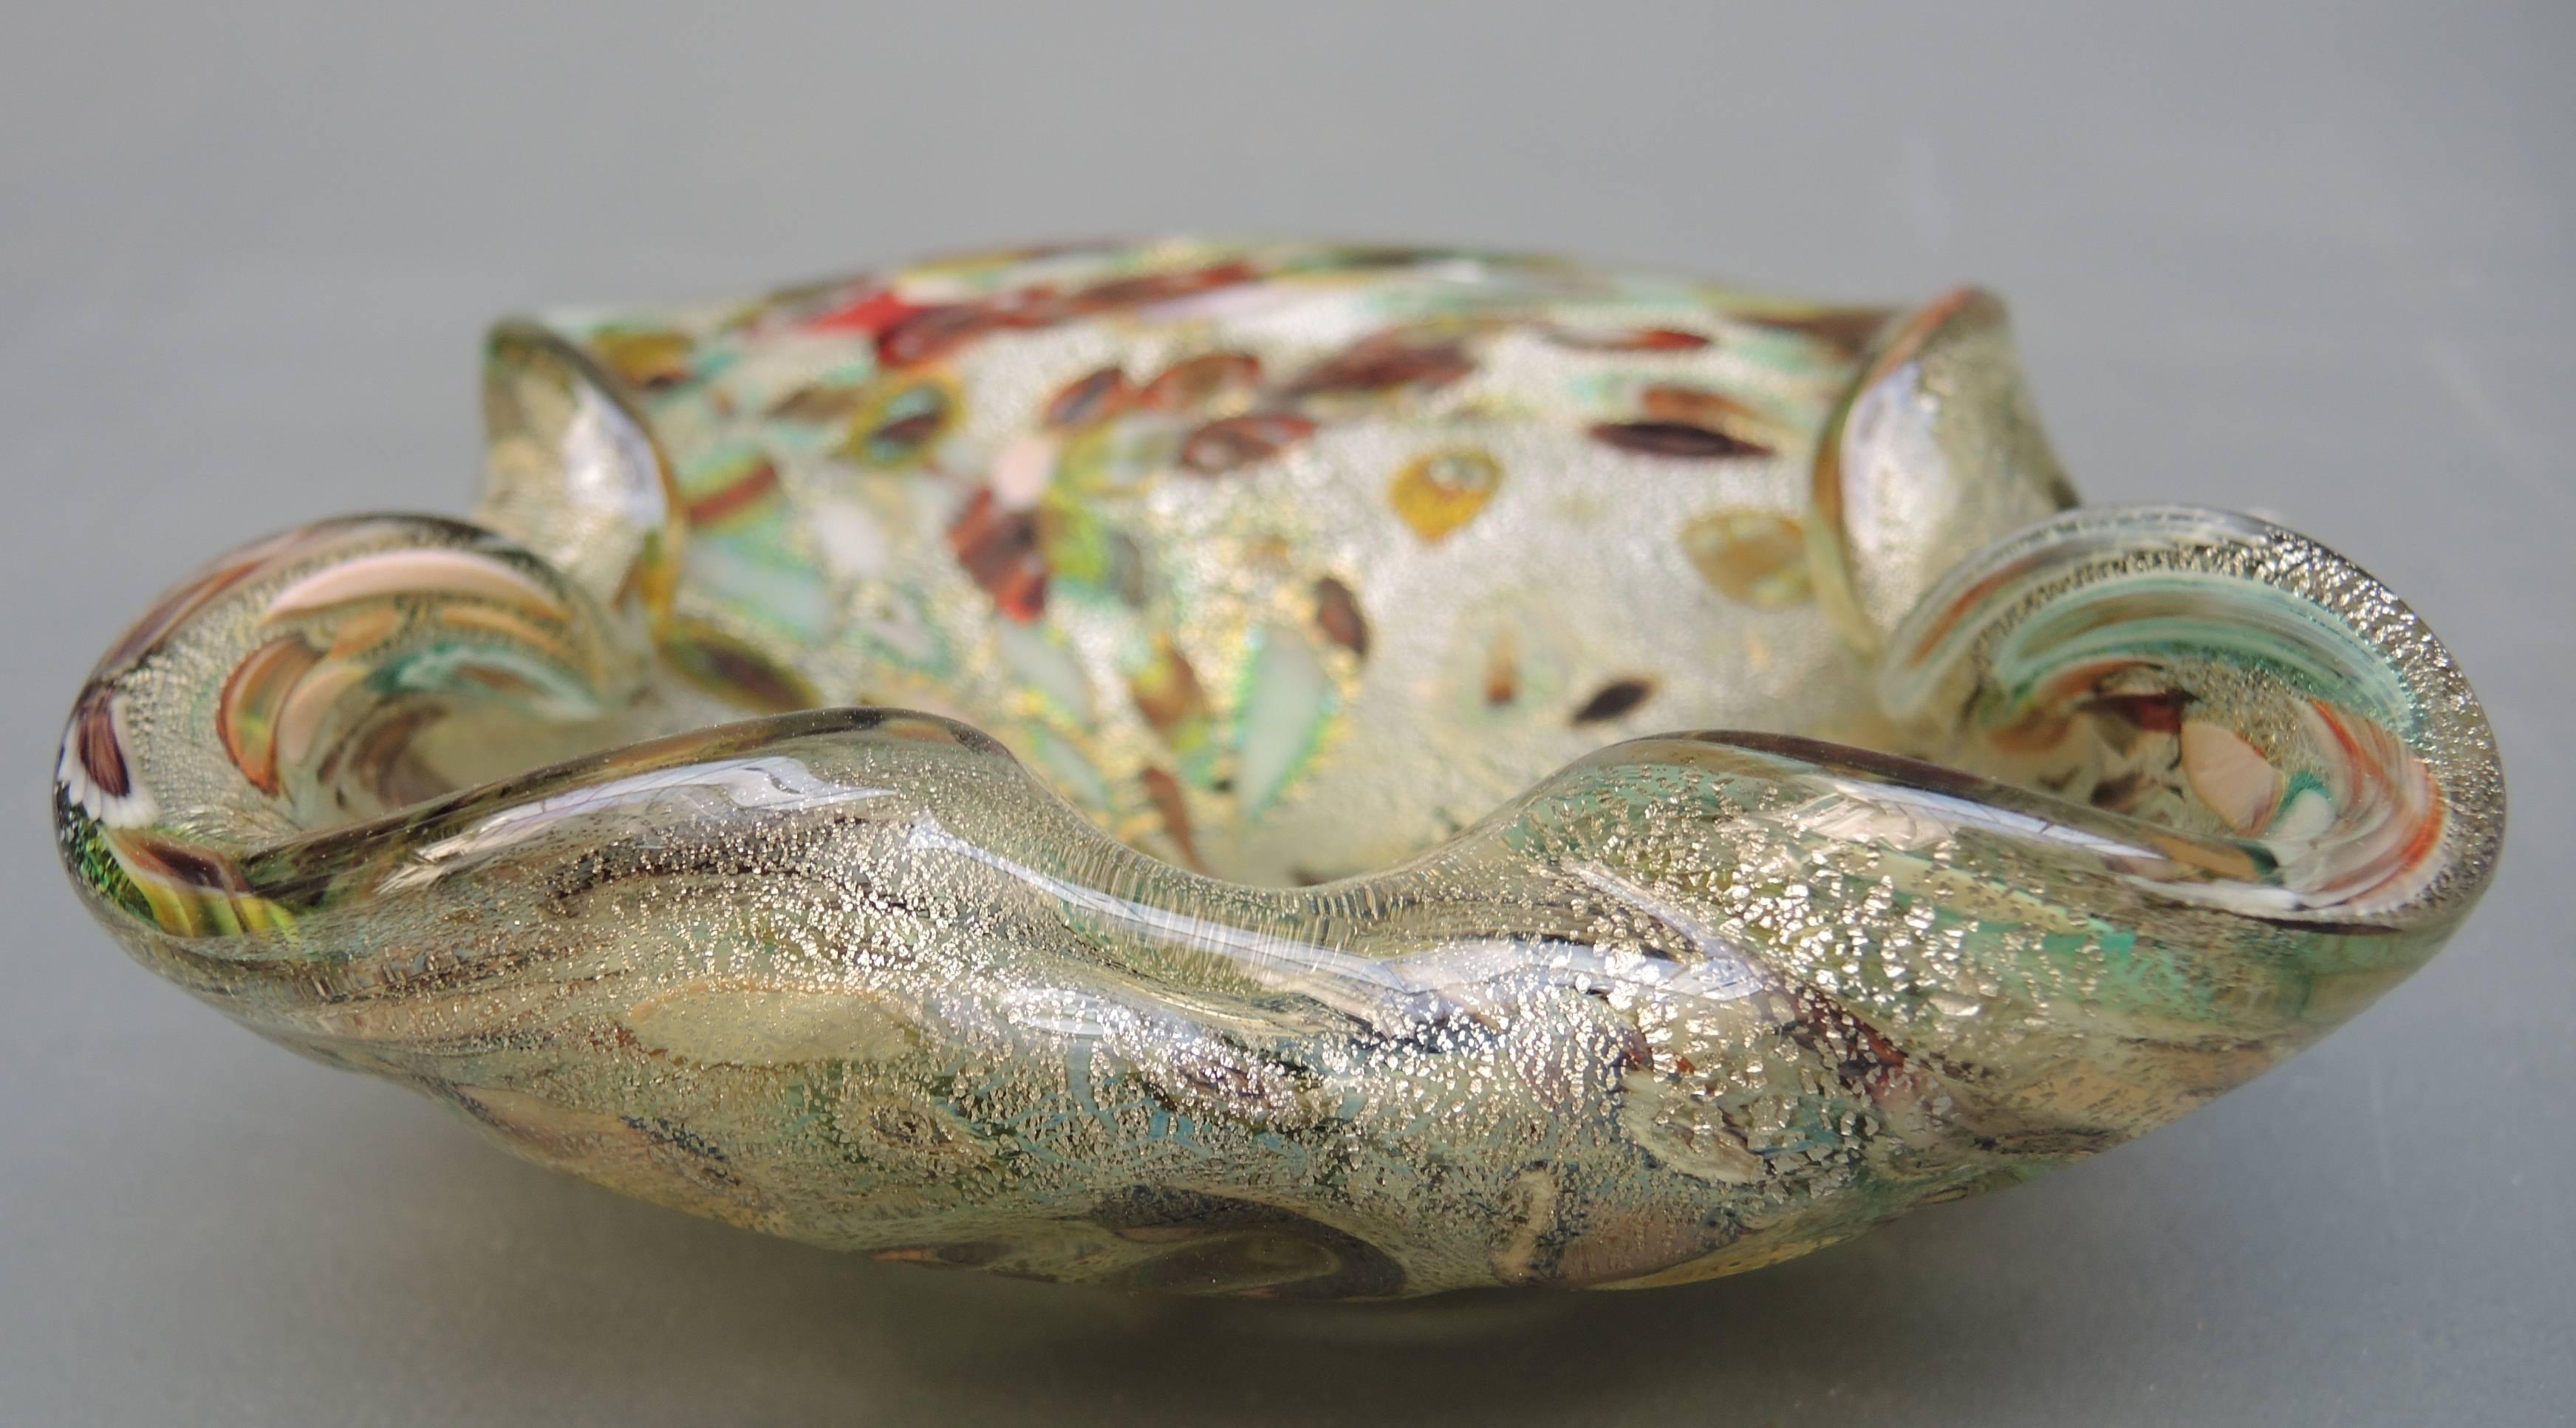 Vintage handblown Murano art glass bowl with Murrine decorations and gold leaf flecks attributed to the designer Aldo Nason and manufactured by Arte Vetraria Muranese, AVEM in the early 1960s.
Expert layering of clear glass, murrine and gold flecks